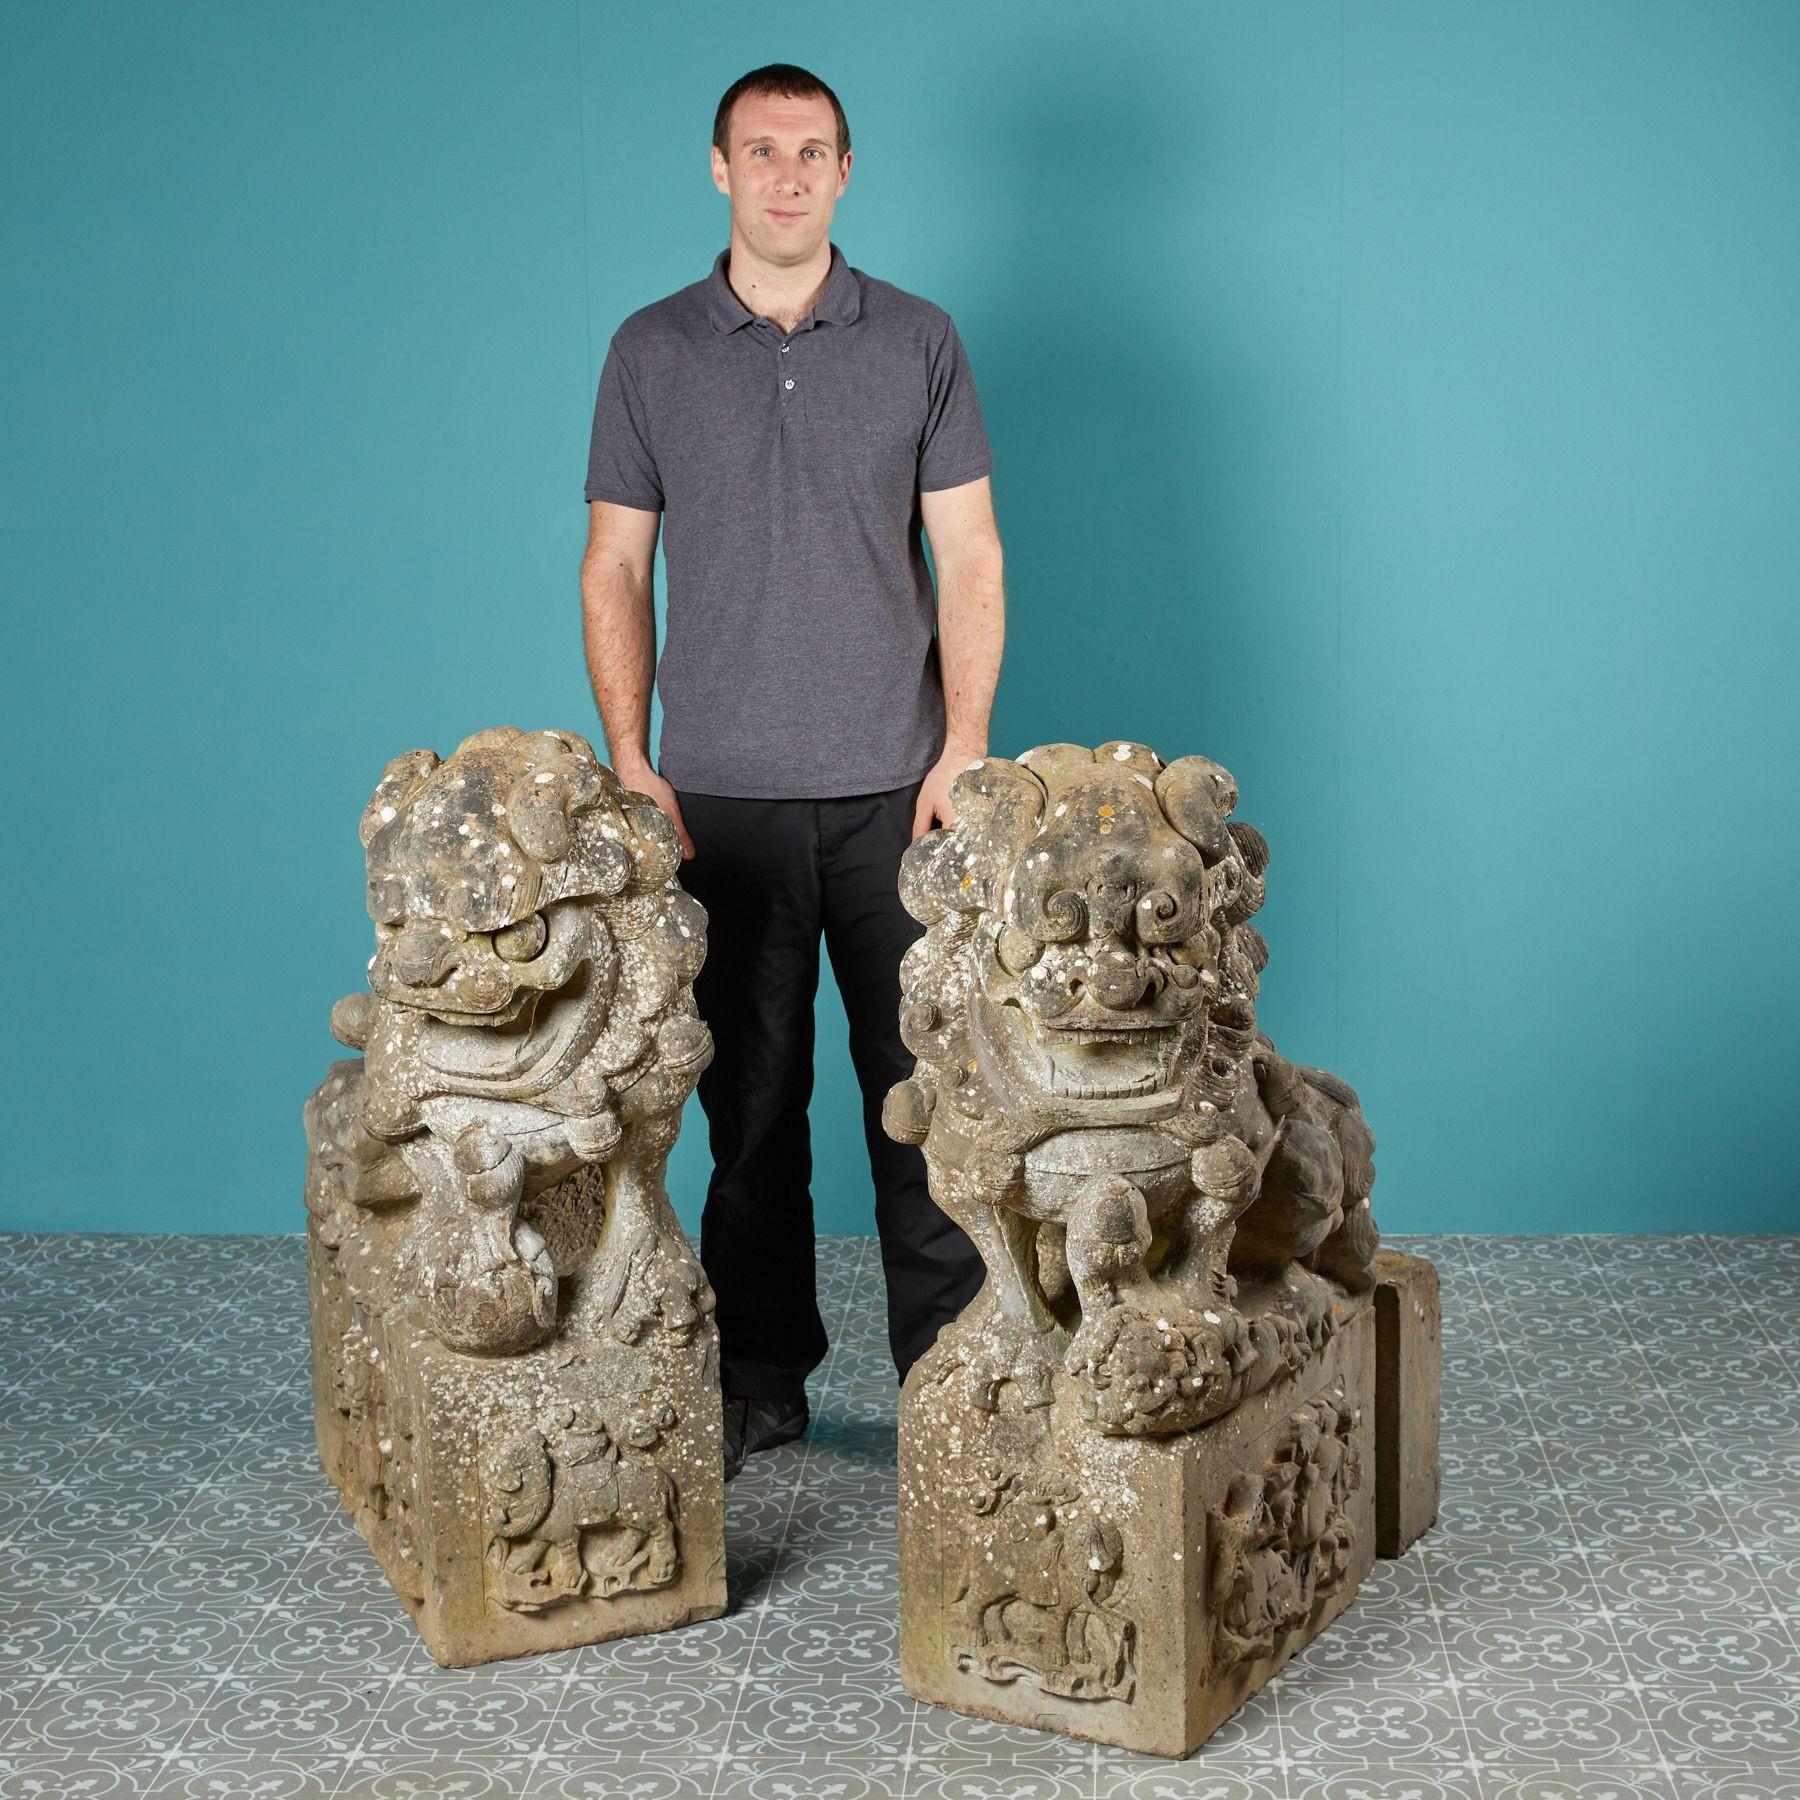 In Asian culture, the lion-like guardian lion or foo dog is a symbol of protection and guardianship. Beautifully carved into sandstone, this large pair of foo dog statues once flanked a great doorway. Associated with power and prosperity, detailed